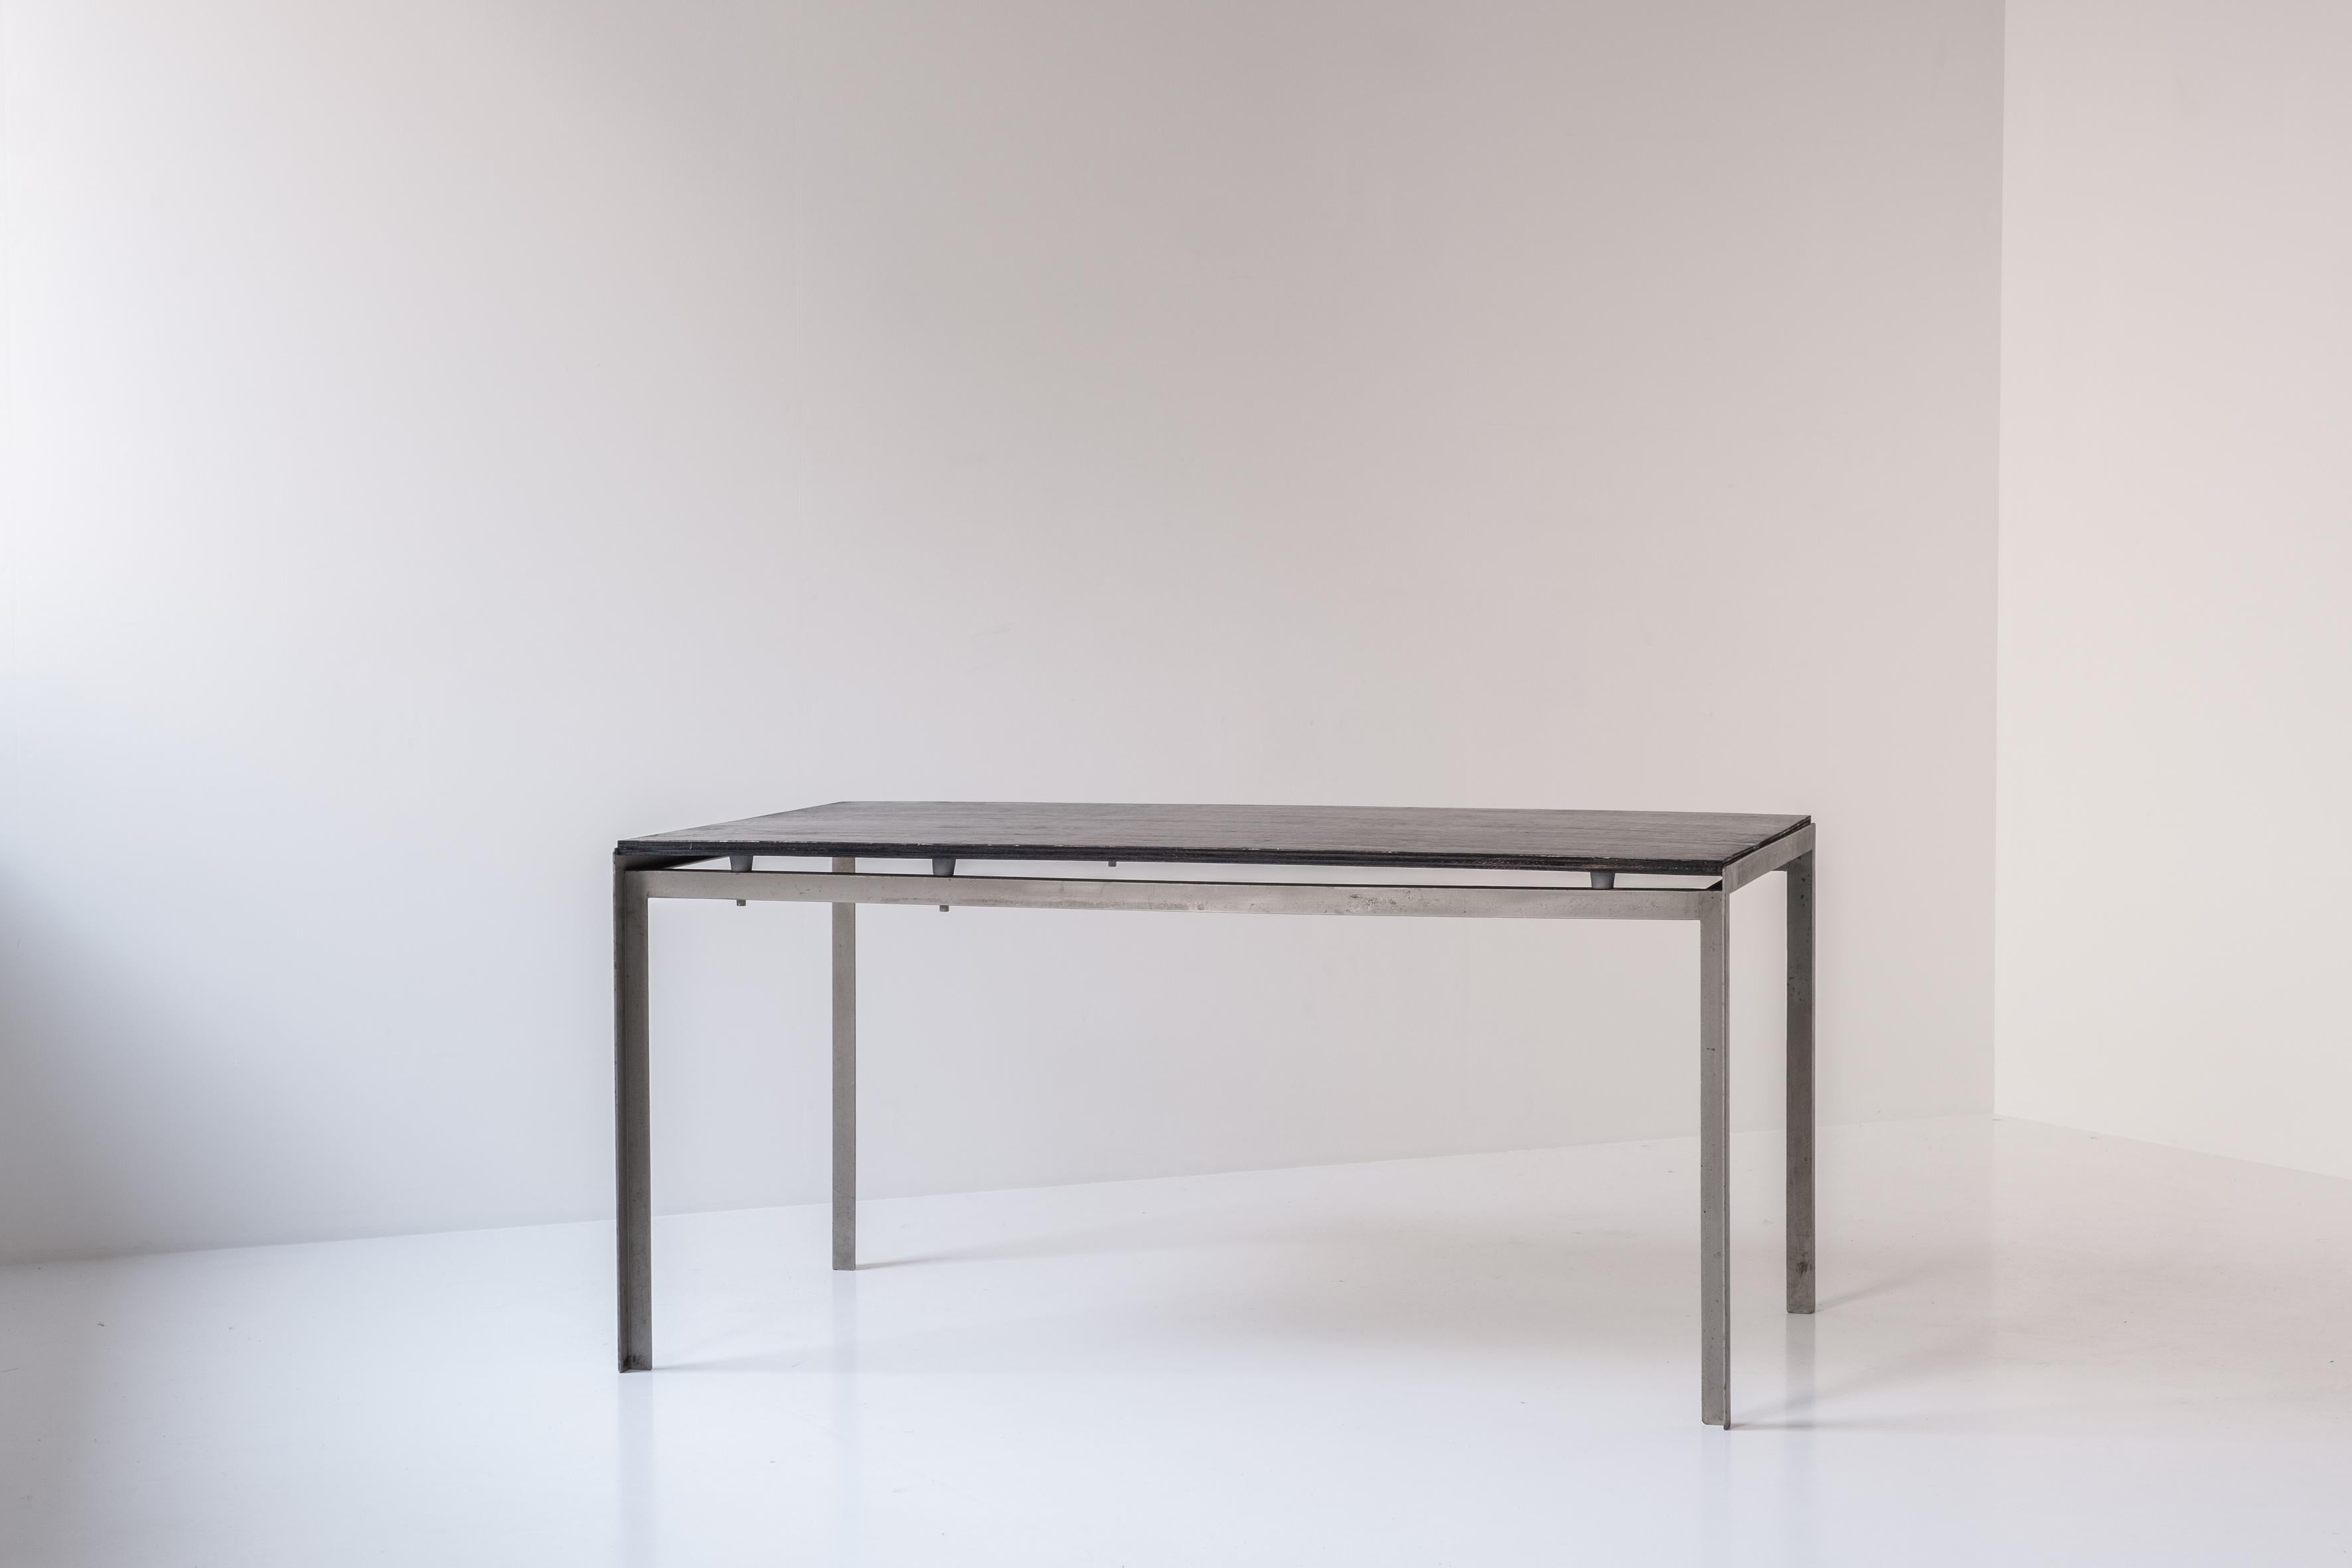 Admire this early PK-52 desk by Poul Kjaerholm for Rud Rasmussen, Denmark 1956. This desk was originally designed for the Royal Danish Academy of Fine Arts in Copenhagen. The desk features a base made out of welded metal and a black stained Oregon